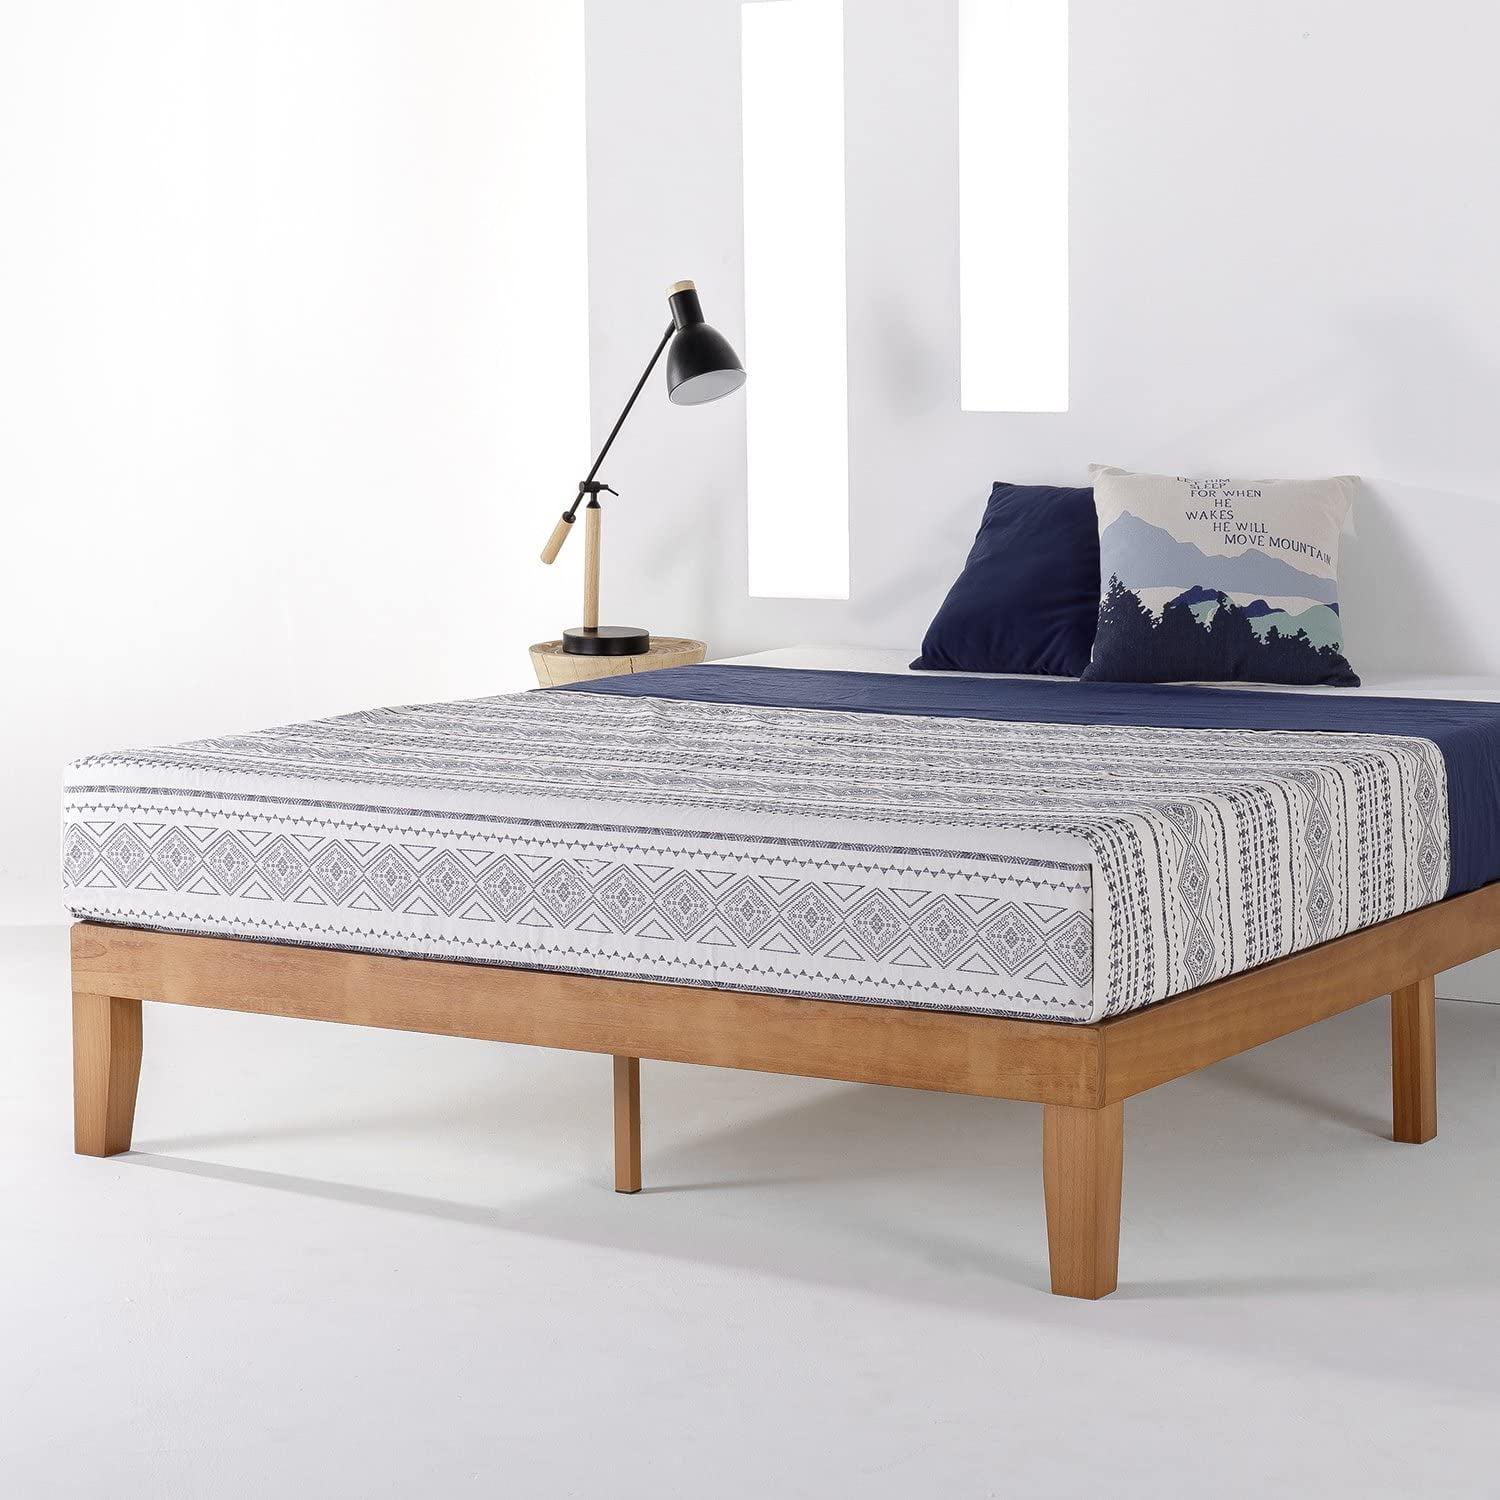 Mellow Naturalista Classic 12 Inch, New Wood Platform Bed Frame Xl Twin Size Solid Hardwood